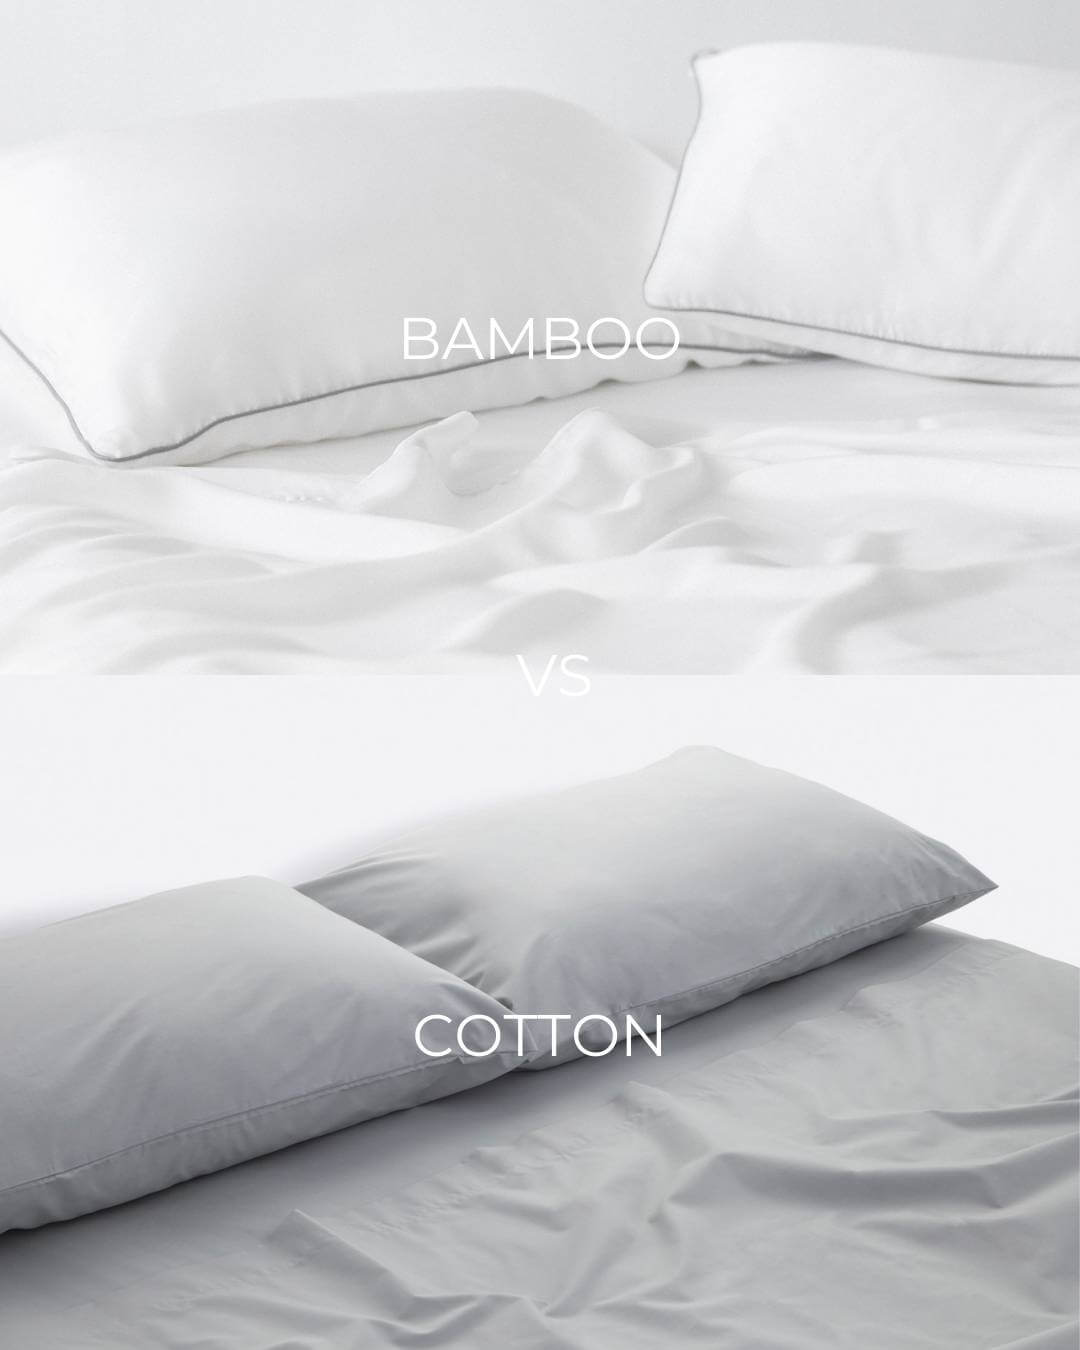 ava and ava philippines bamboo vs cotton bed sheets